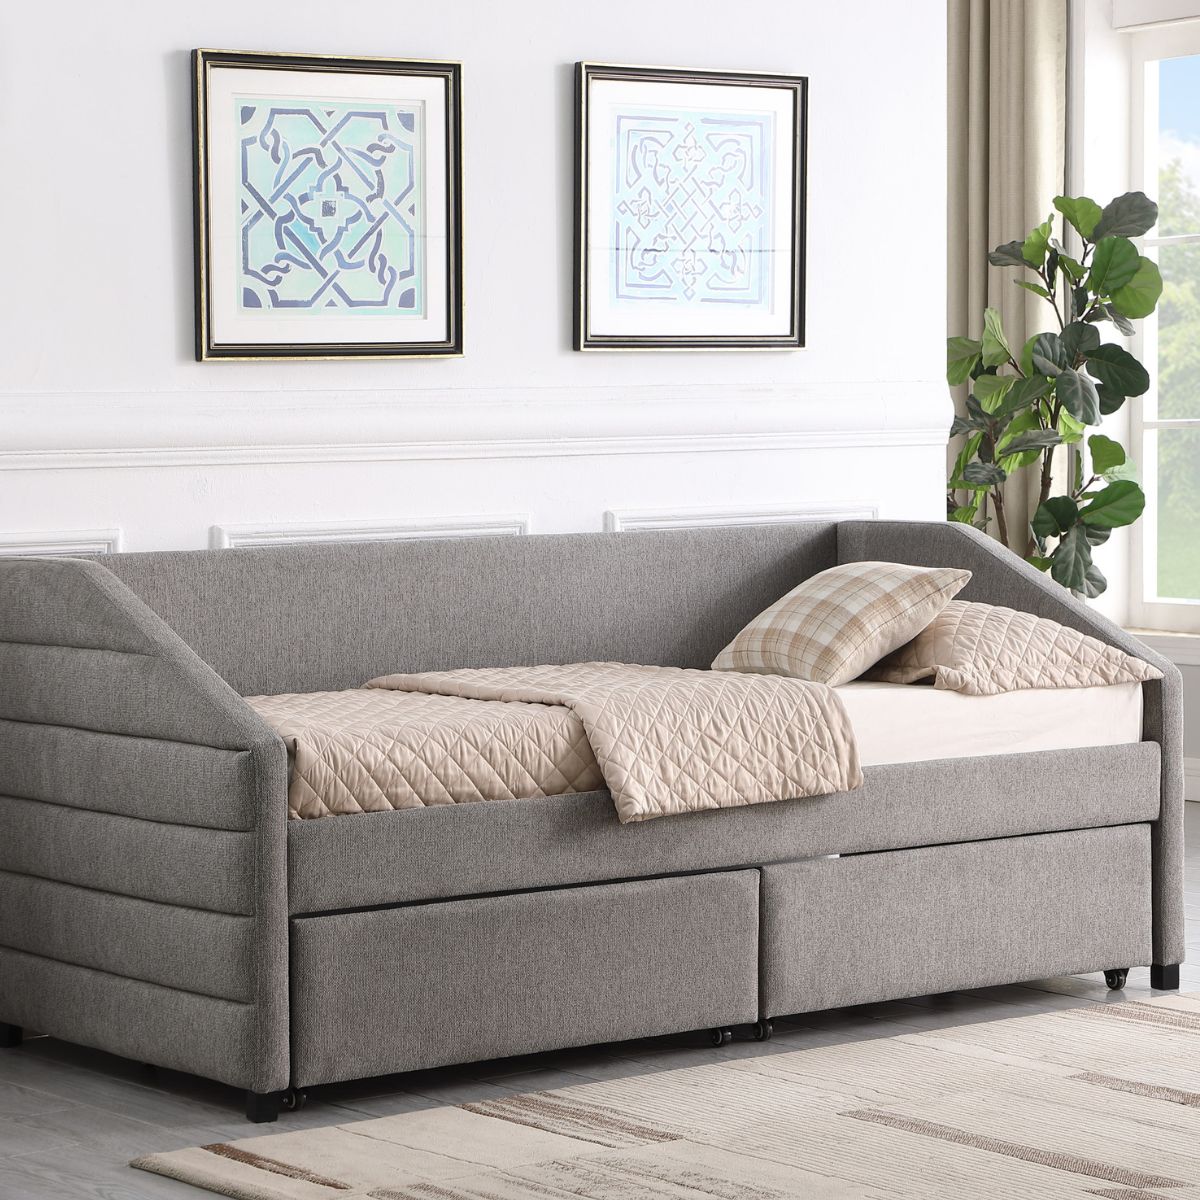 Baku Upholstered Day Bed with Storage Grey - 2